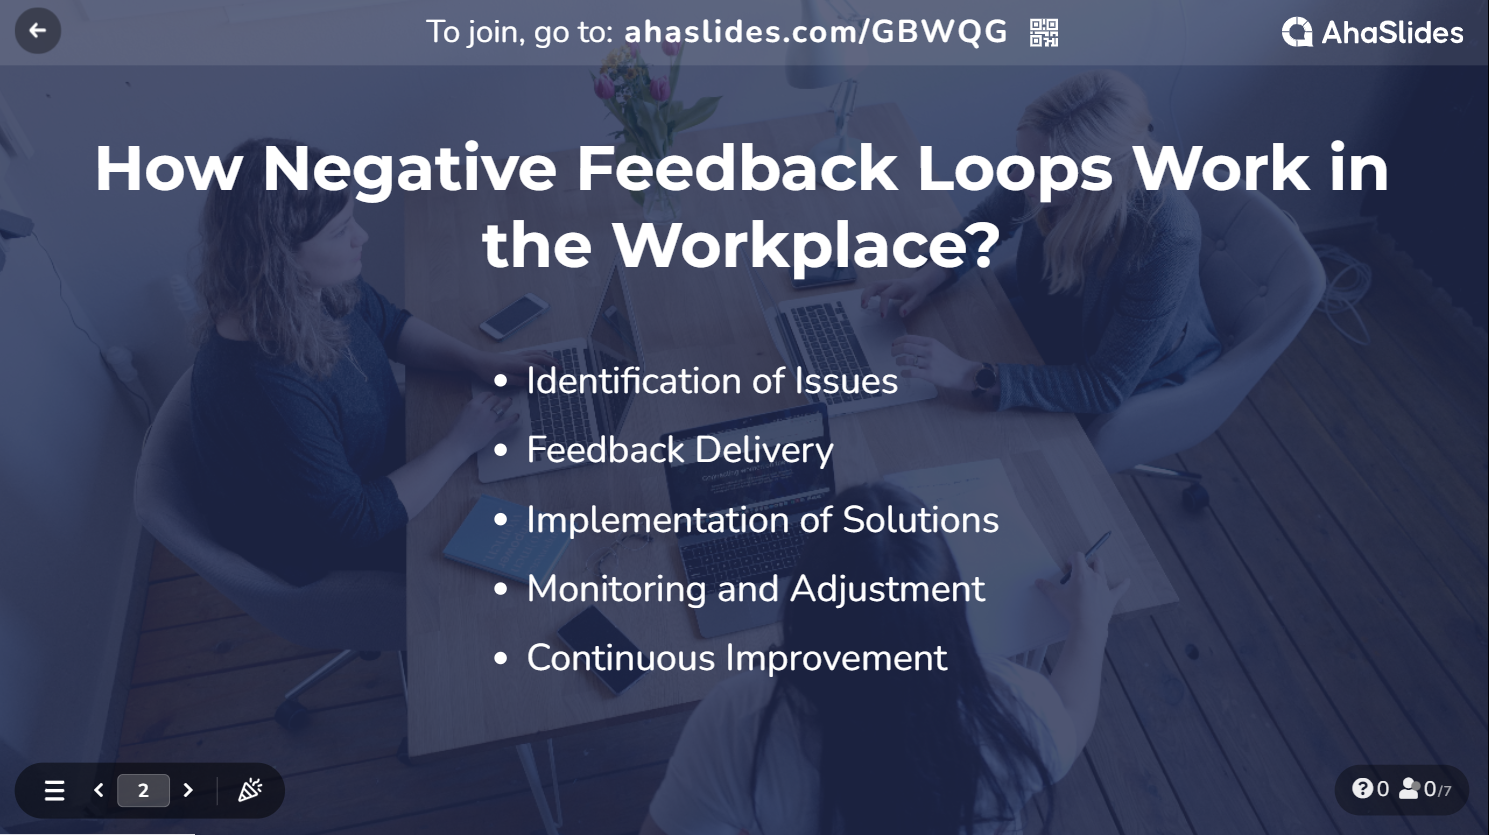 Negative feedback loops in the workplace